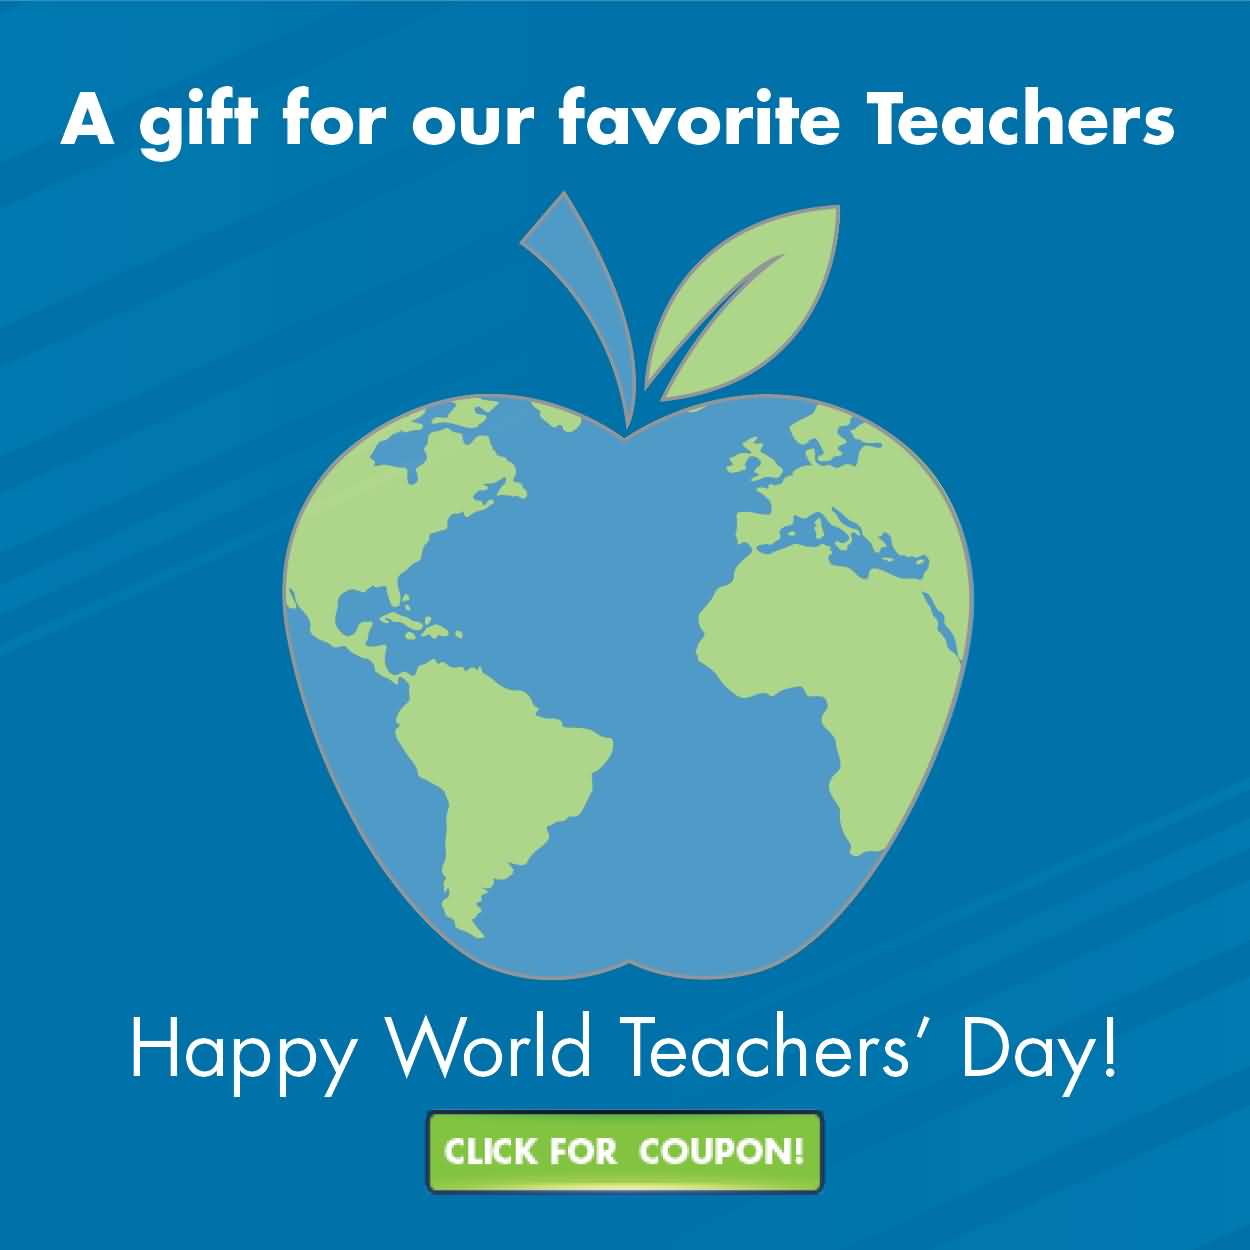 A Gift For Our Favorite Teachers Happy World Teachers’ Day